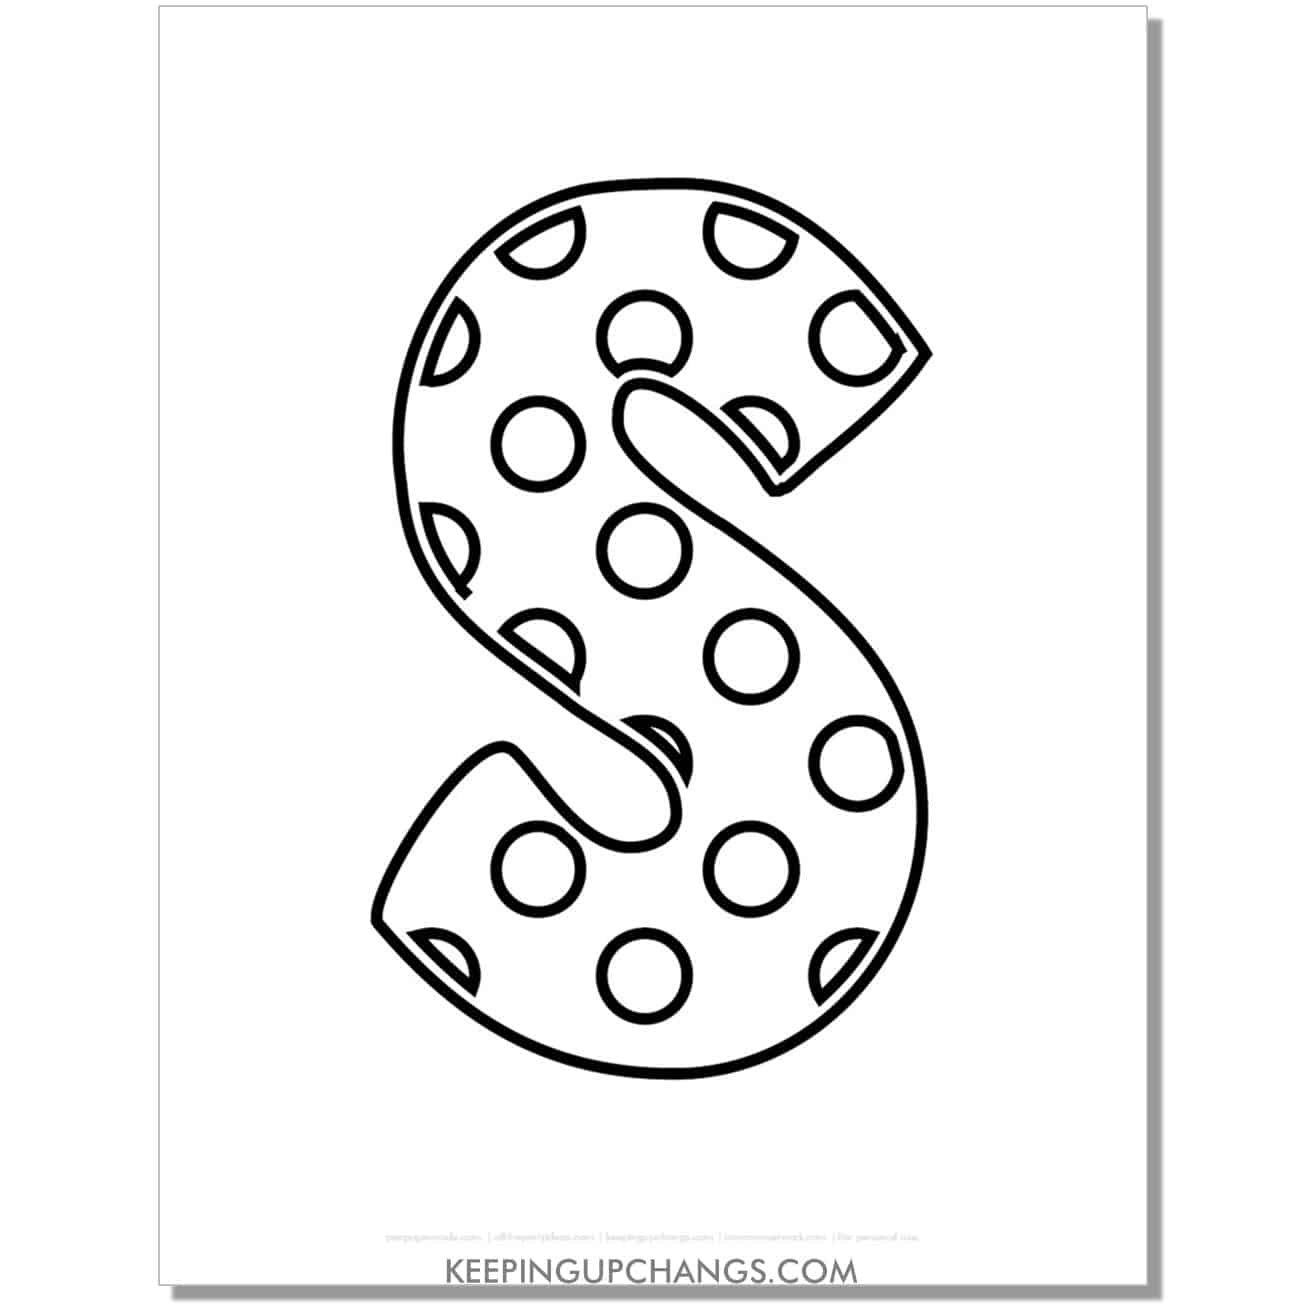 free alphabet letter s coloring page with polka dots for toddlers, preschool, kindergarten.